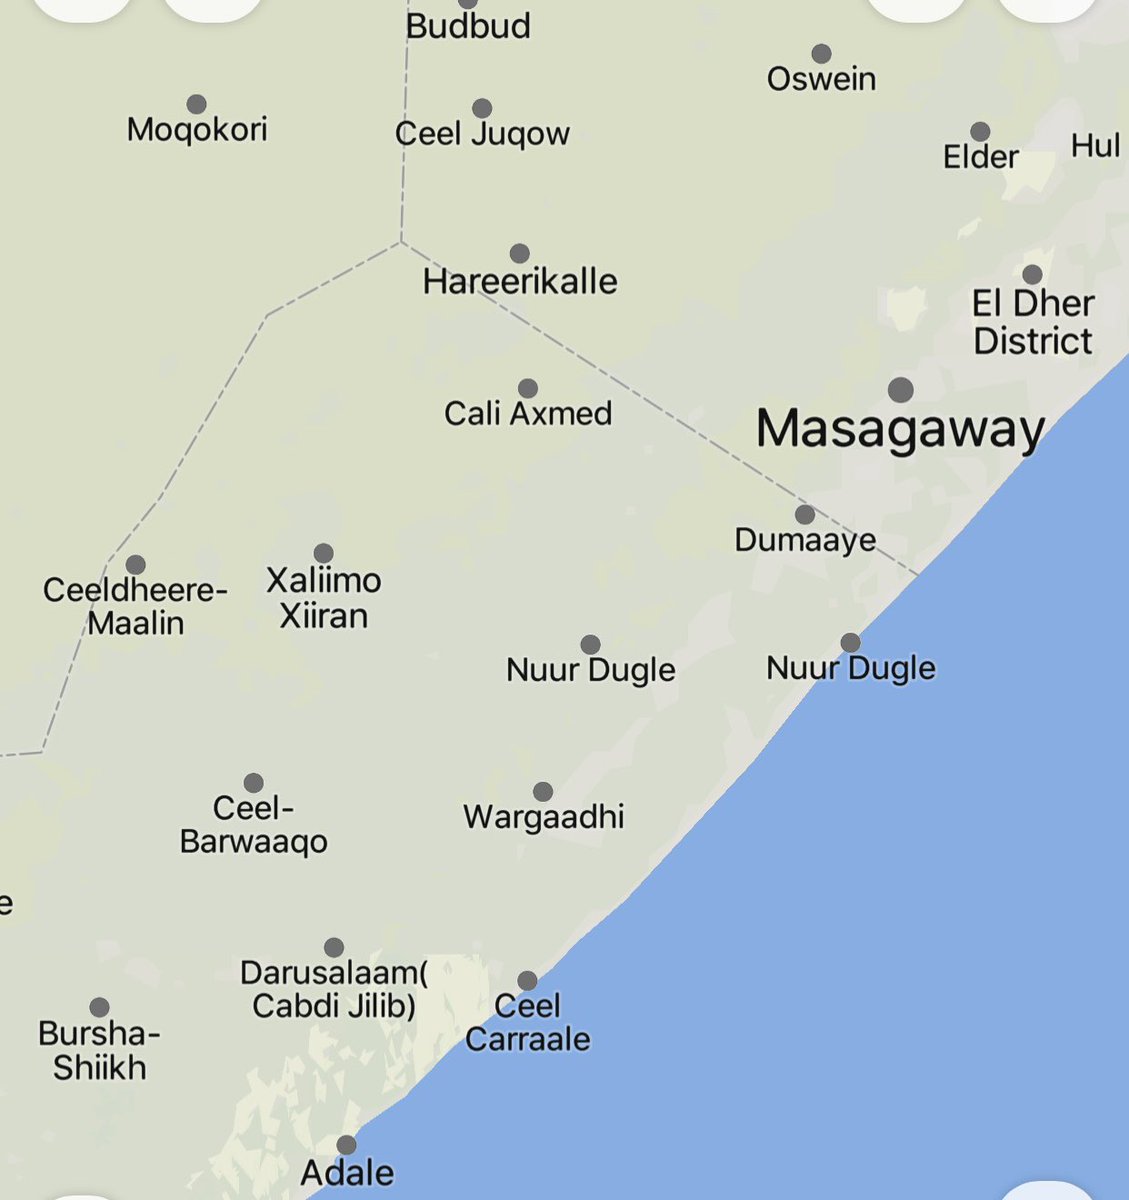 Somali government media reporting that national forces confronted and repelled an attempted al-Shabaab attack on Masagaway town in the central Galmudug State, on Tuesday. According to the report Govt forces reported received a tip about an imminent al-Shabaab attack and were prepared